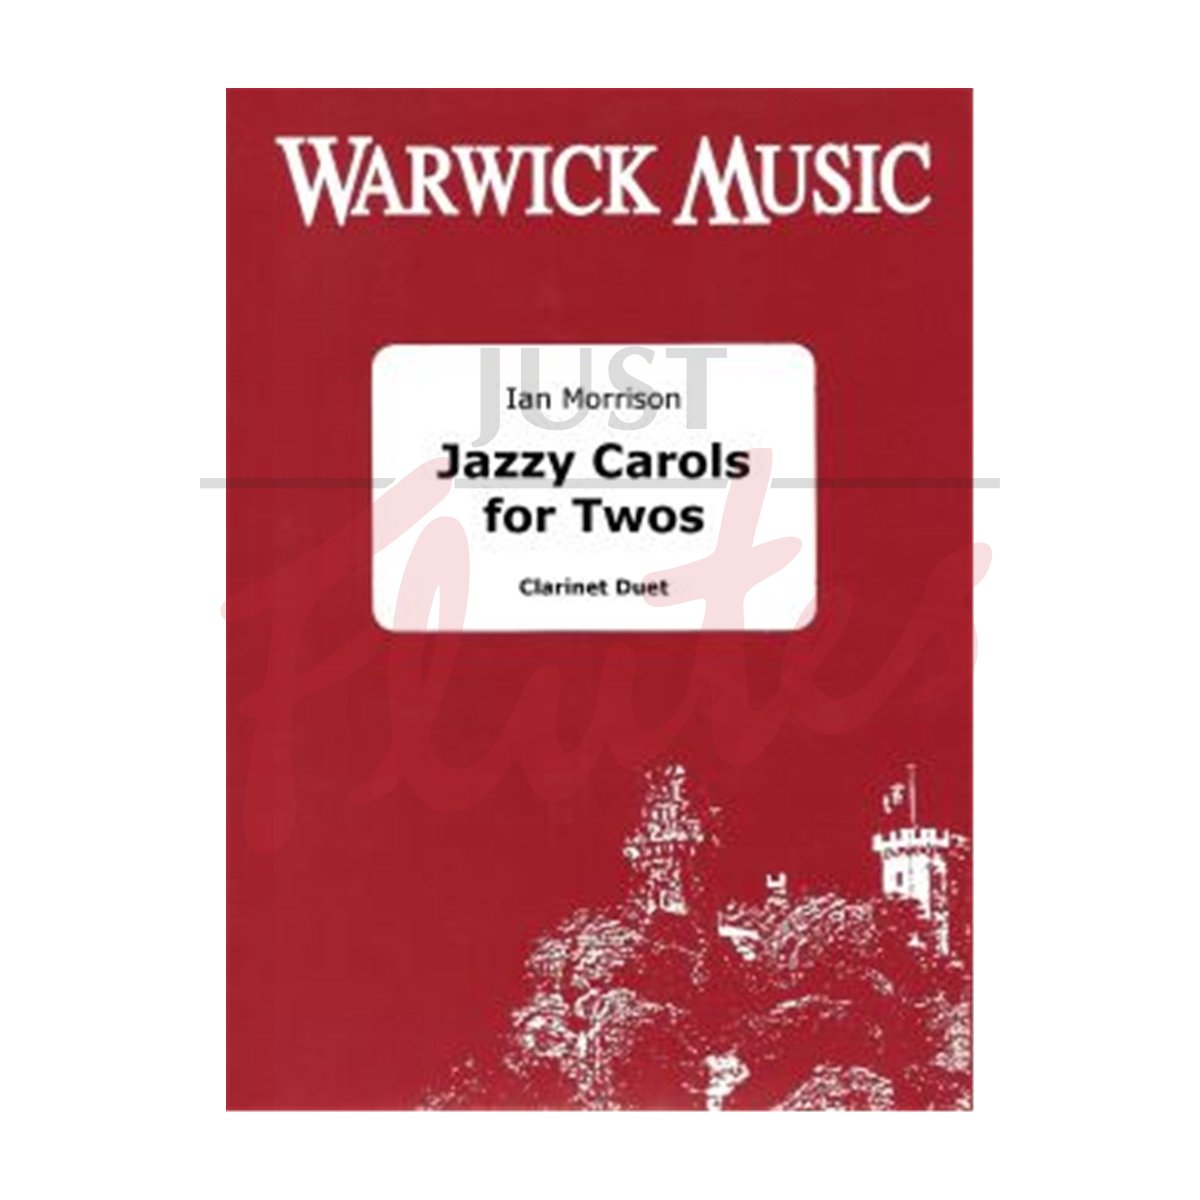 Jazzy Carols for Twos for Clarinet Duet